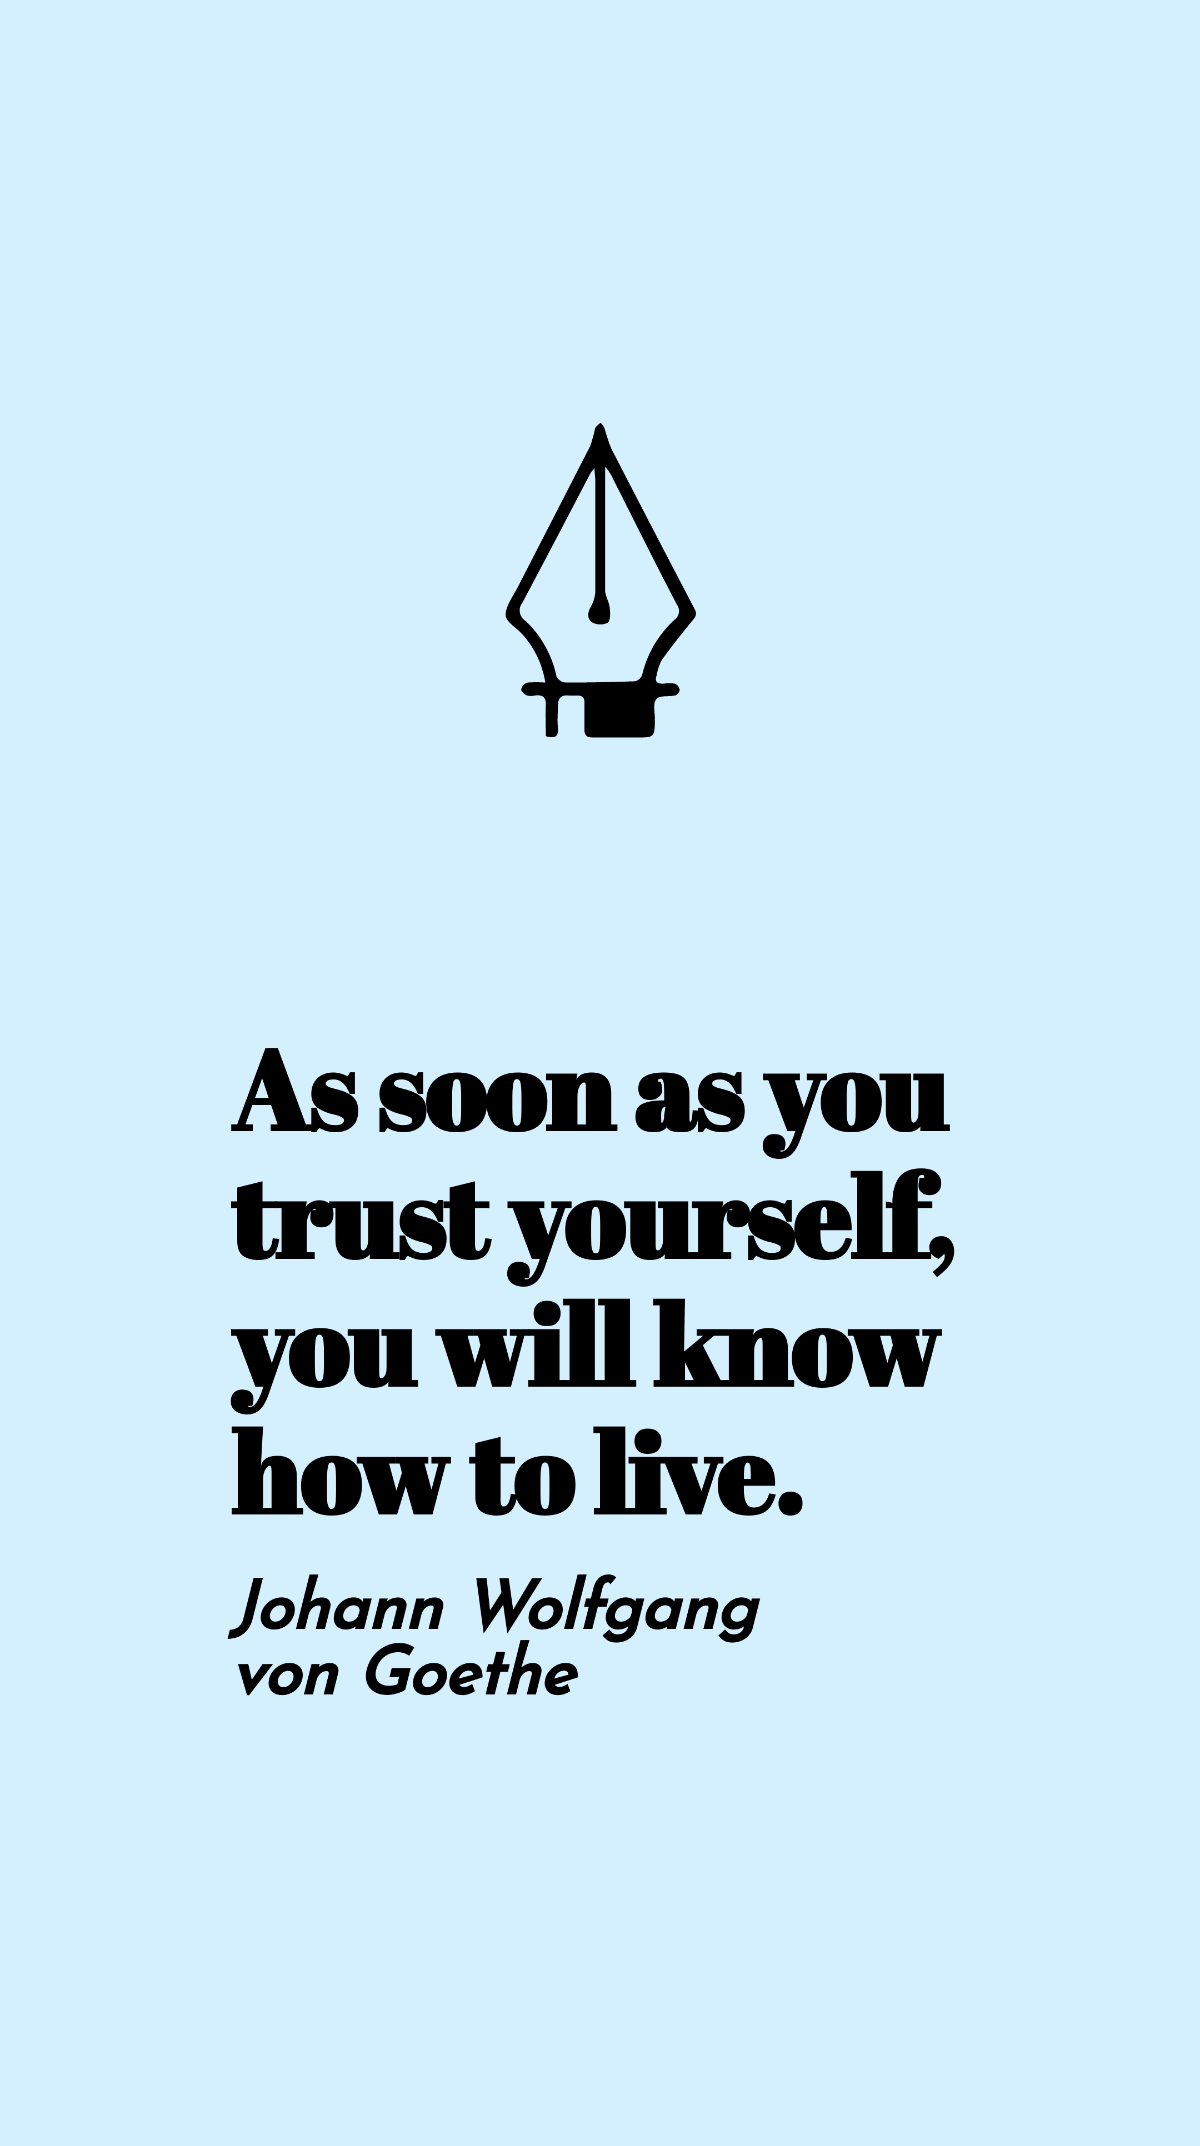 Johann Wolfgang von Goethe - As soon as you trust yourself, you will know how to live. Template